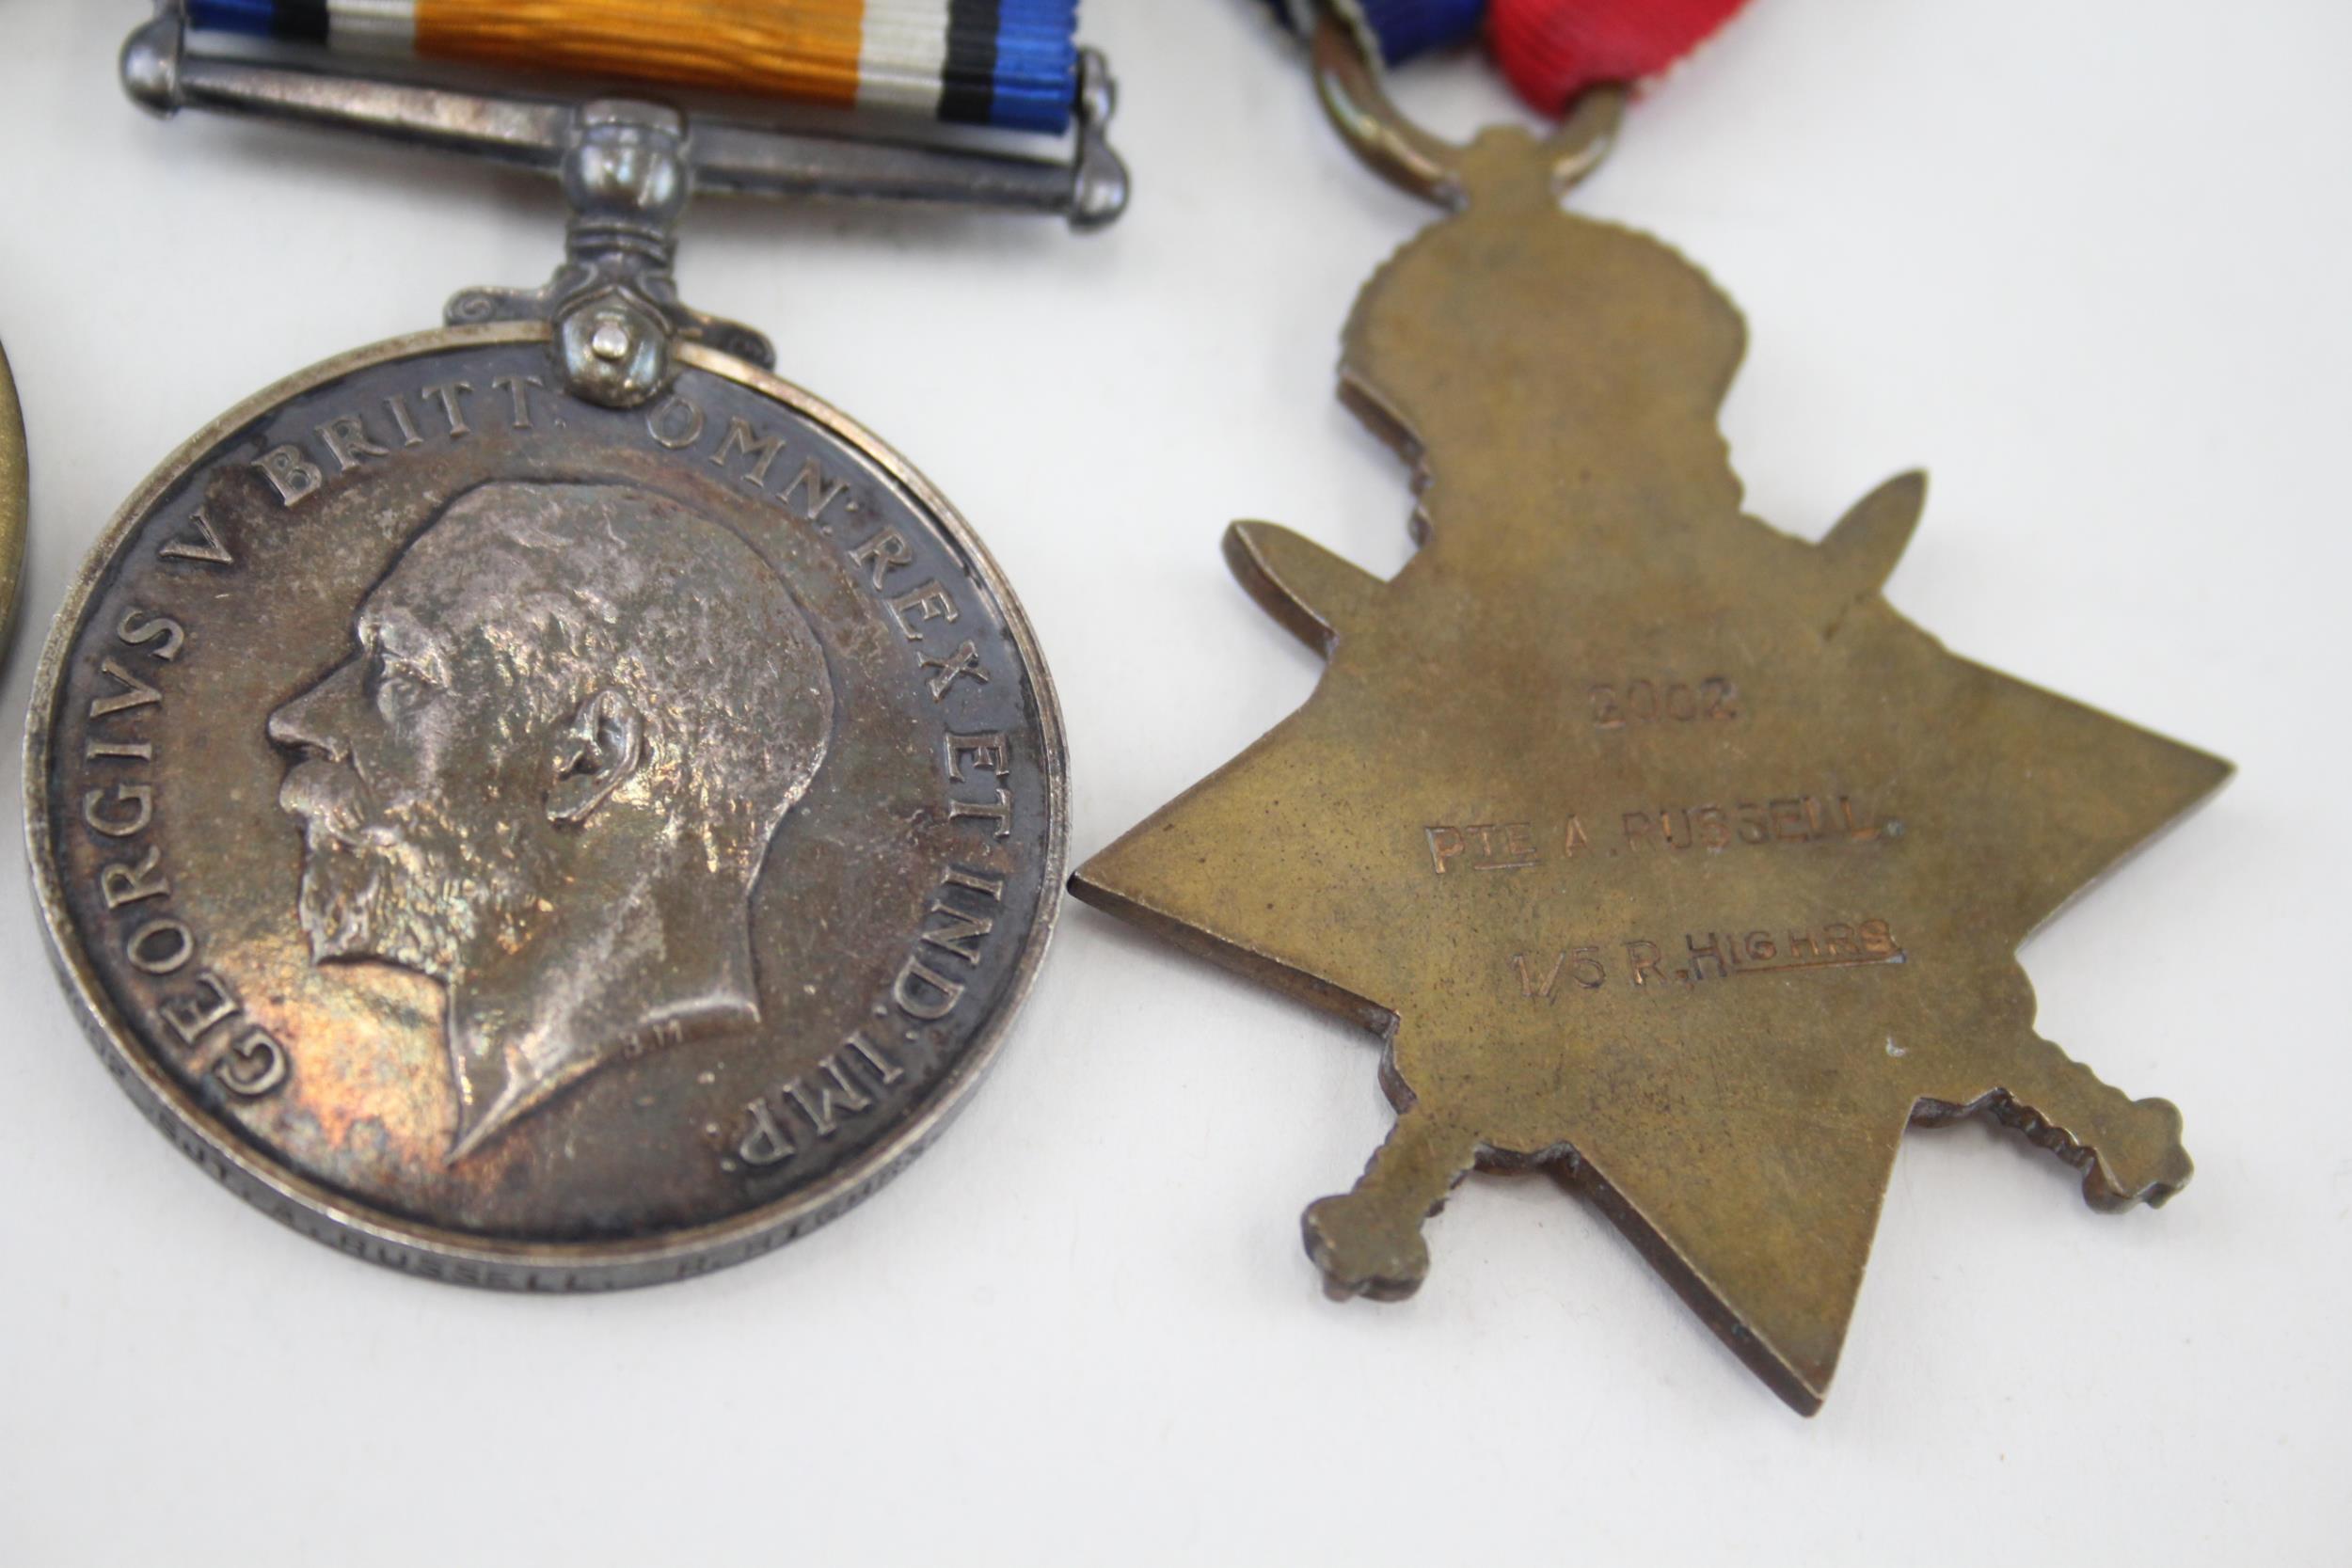 WW1 1914 Mons Star - Territorial Medal Mounted Group - WW1 1914 Mons Star - Territorial Medal - Image 8 of 8